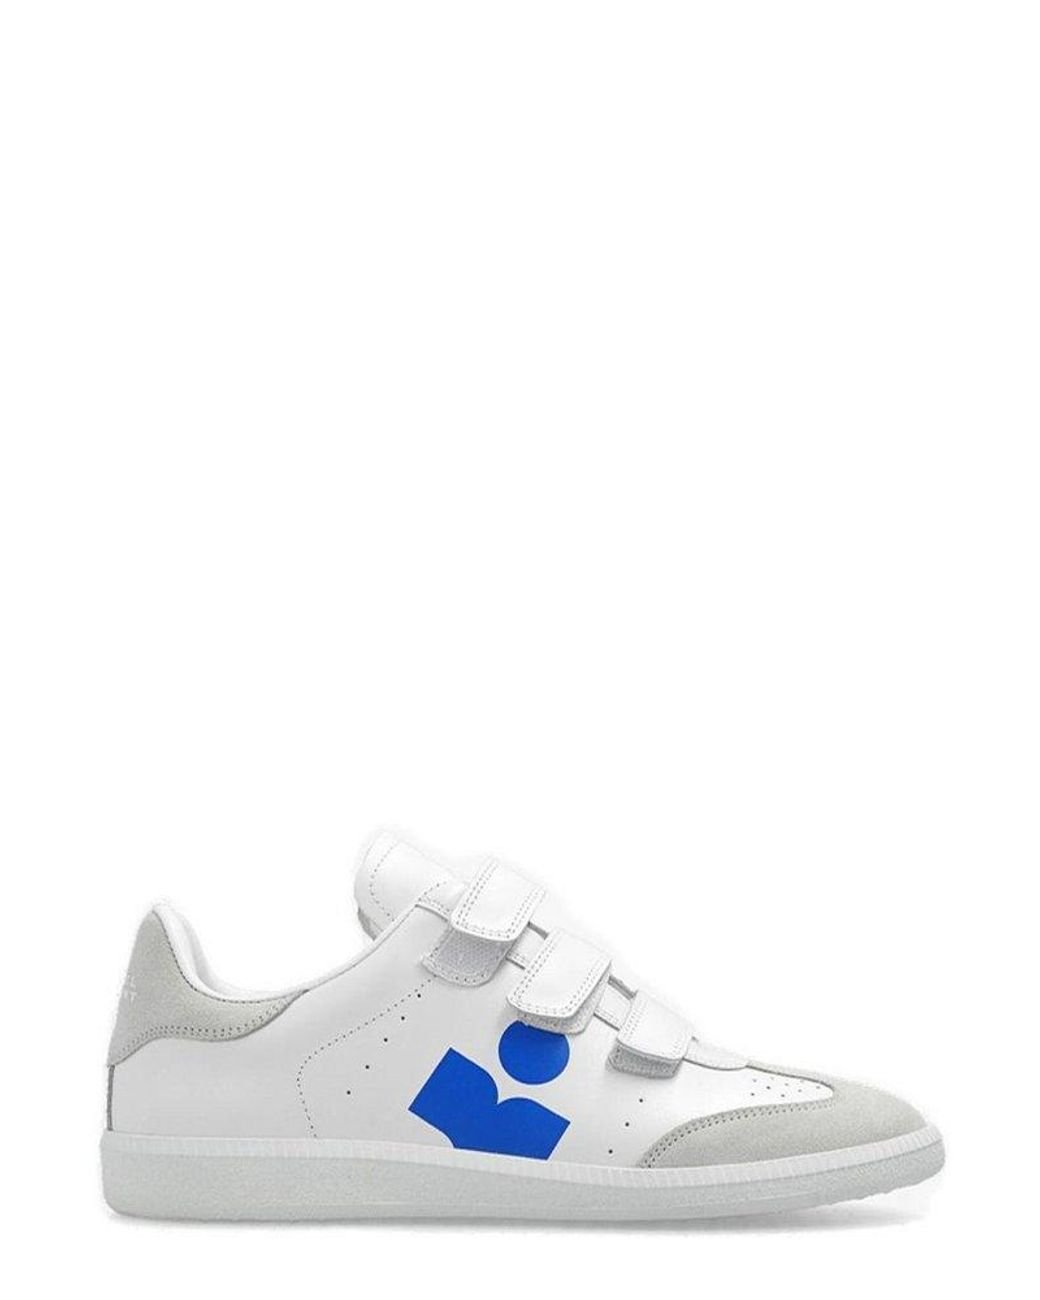 Isabel Marant Beth Logo Printed Touch-strap Sneakers in White | Lyst